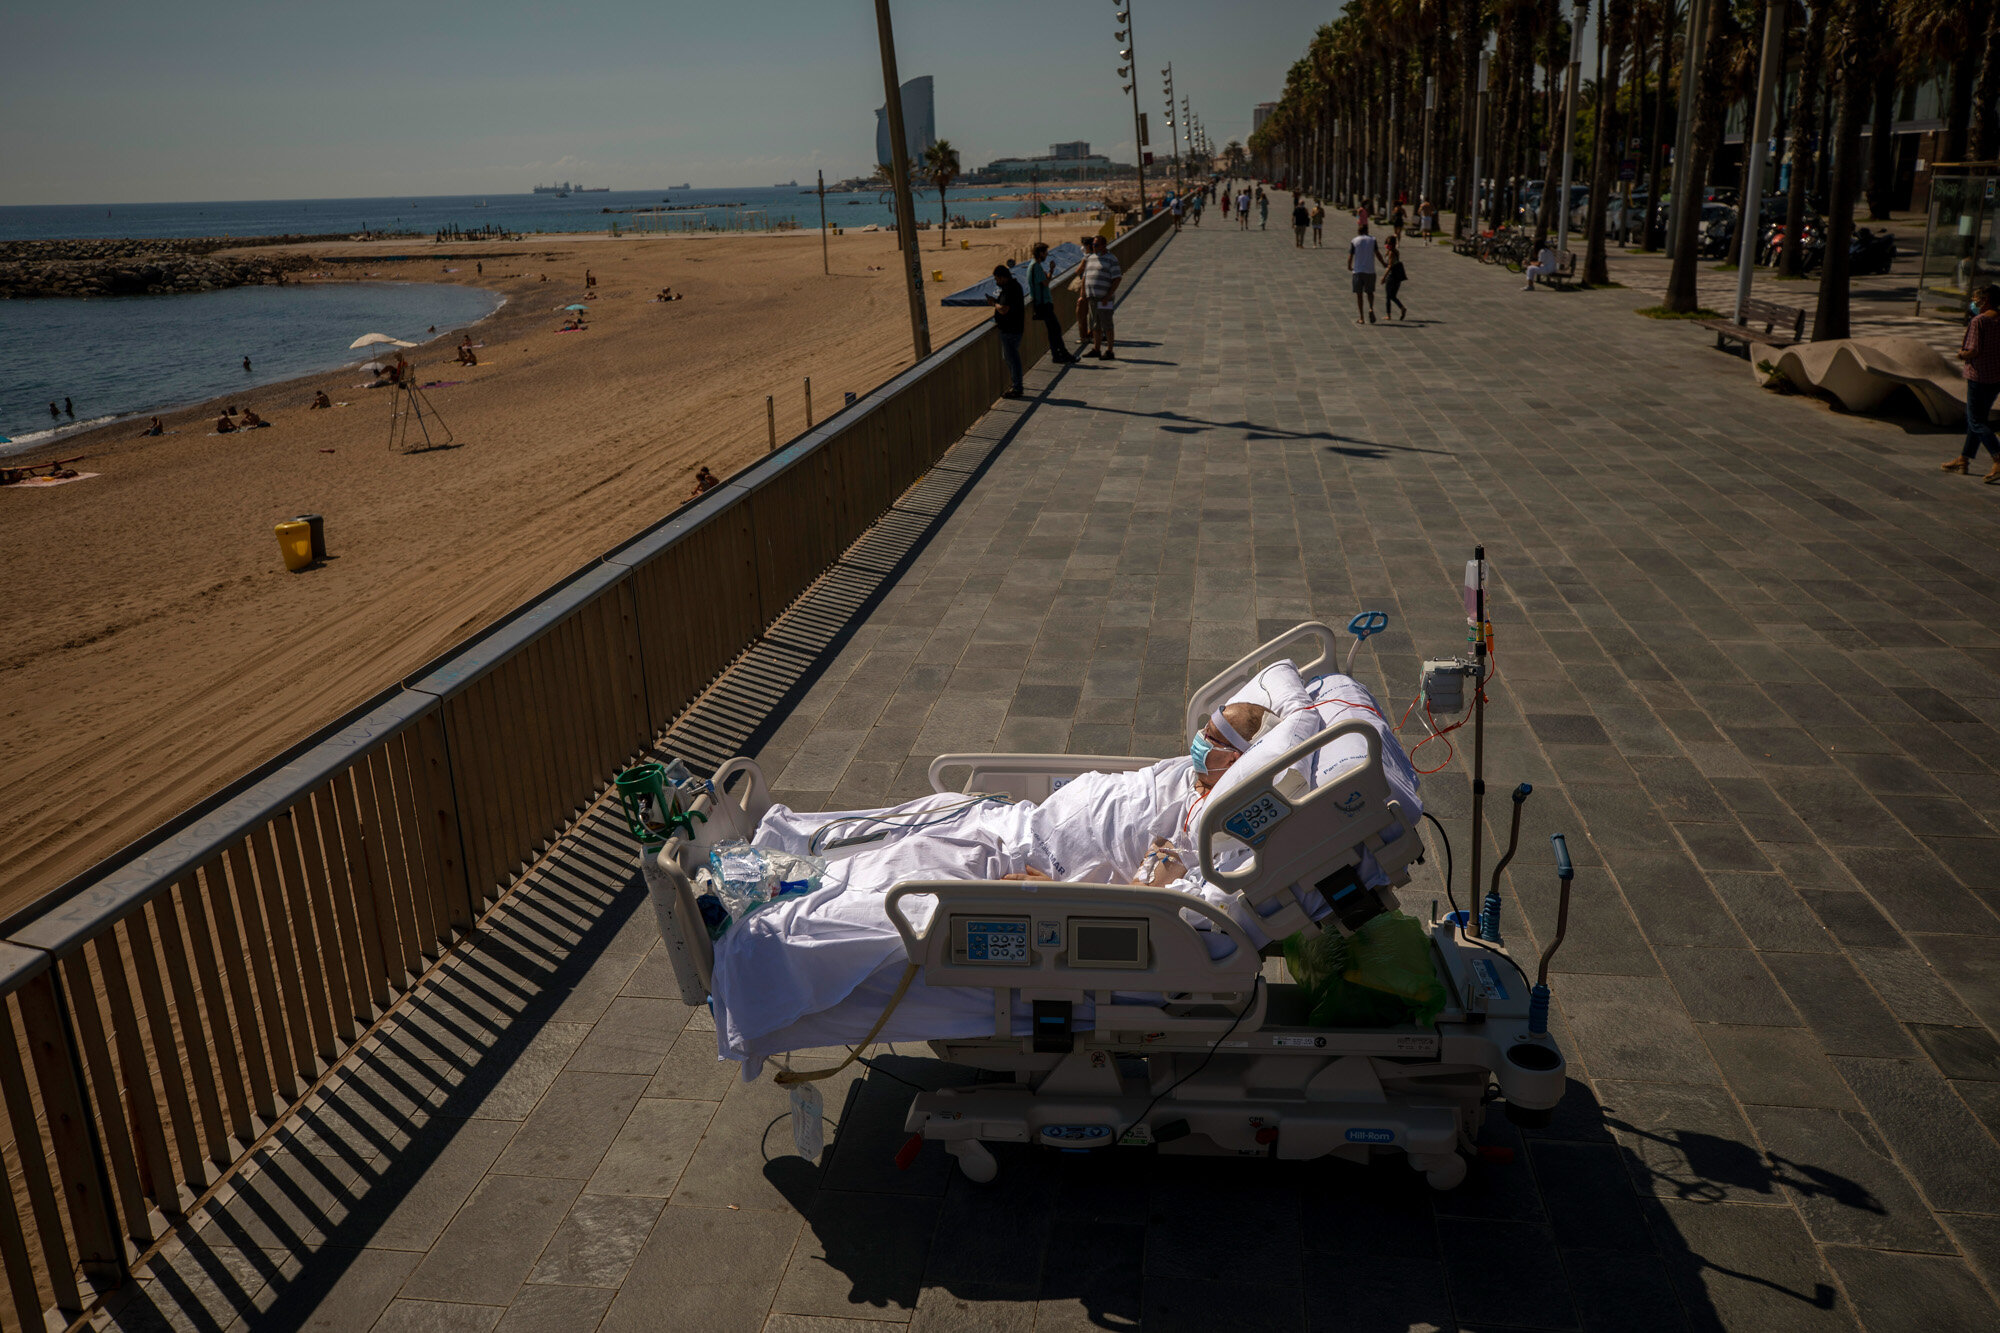  Francisco Espana looks at the Mediterranean sea from a promenade next to the Hospital del Mar in Barcelona, Spain, on Sept. 4, 2020. After 52 days in the hospital’s intensive care unit due to the coronavirus, Francisco was allowed by his doctors to 